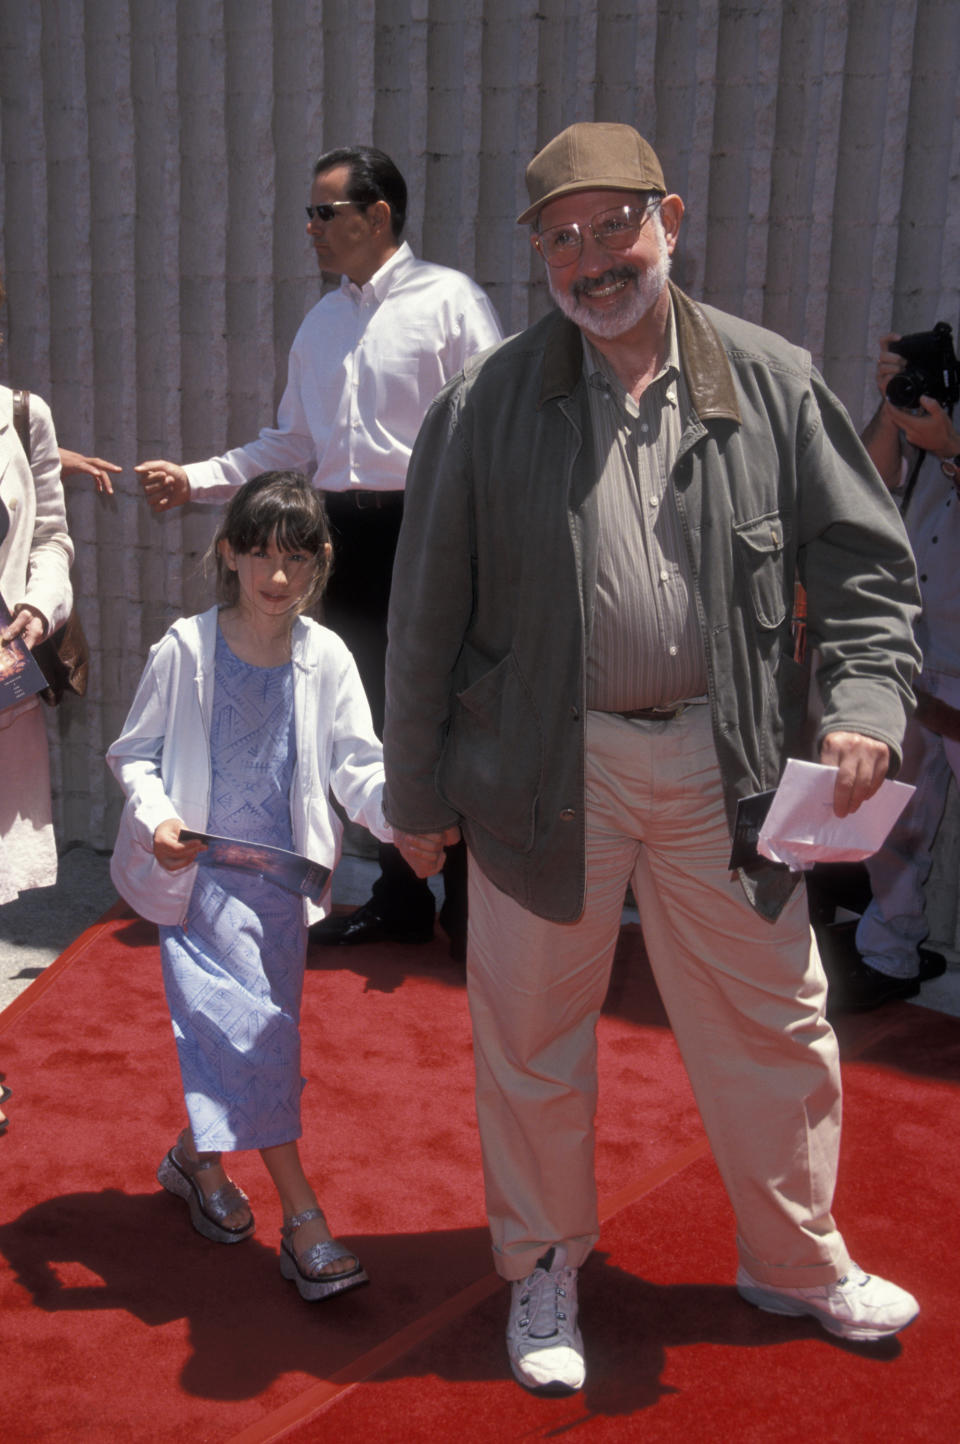 Director Brian De Palma attending the premiere of Star Wars Episode I: A Phantom Menace on May 16, 1999 at the Westwood Avco Theater in Westwood, California. (Photo by Ron Galella, Ltd./WireImage)